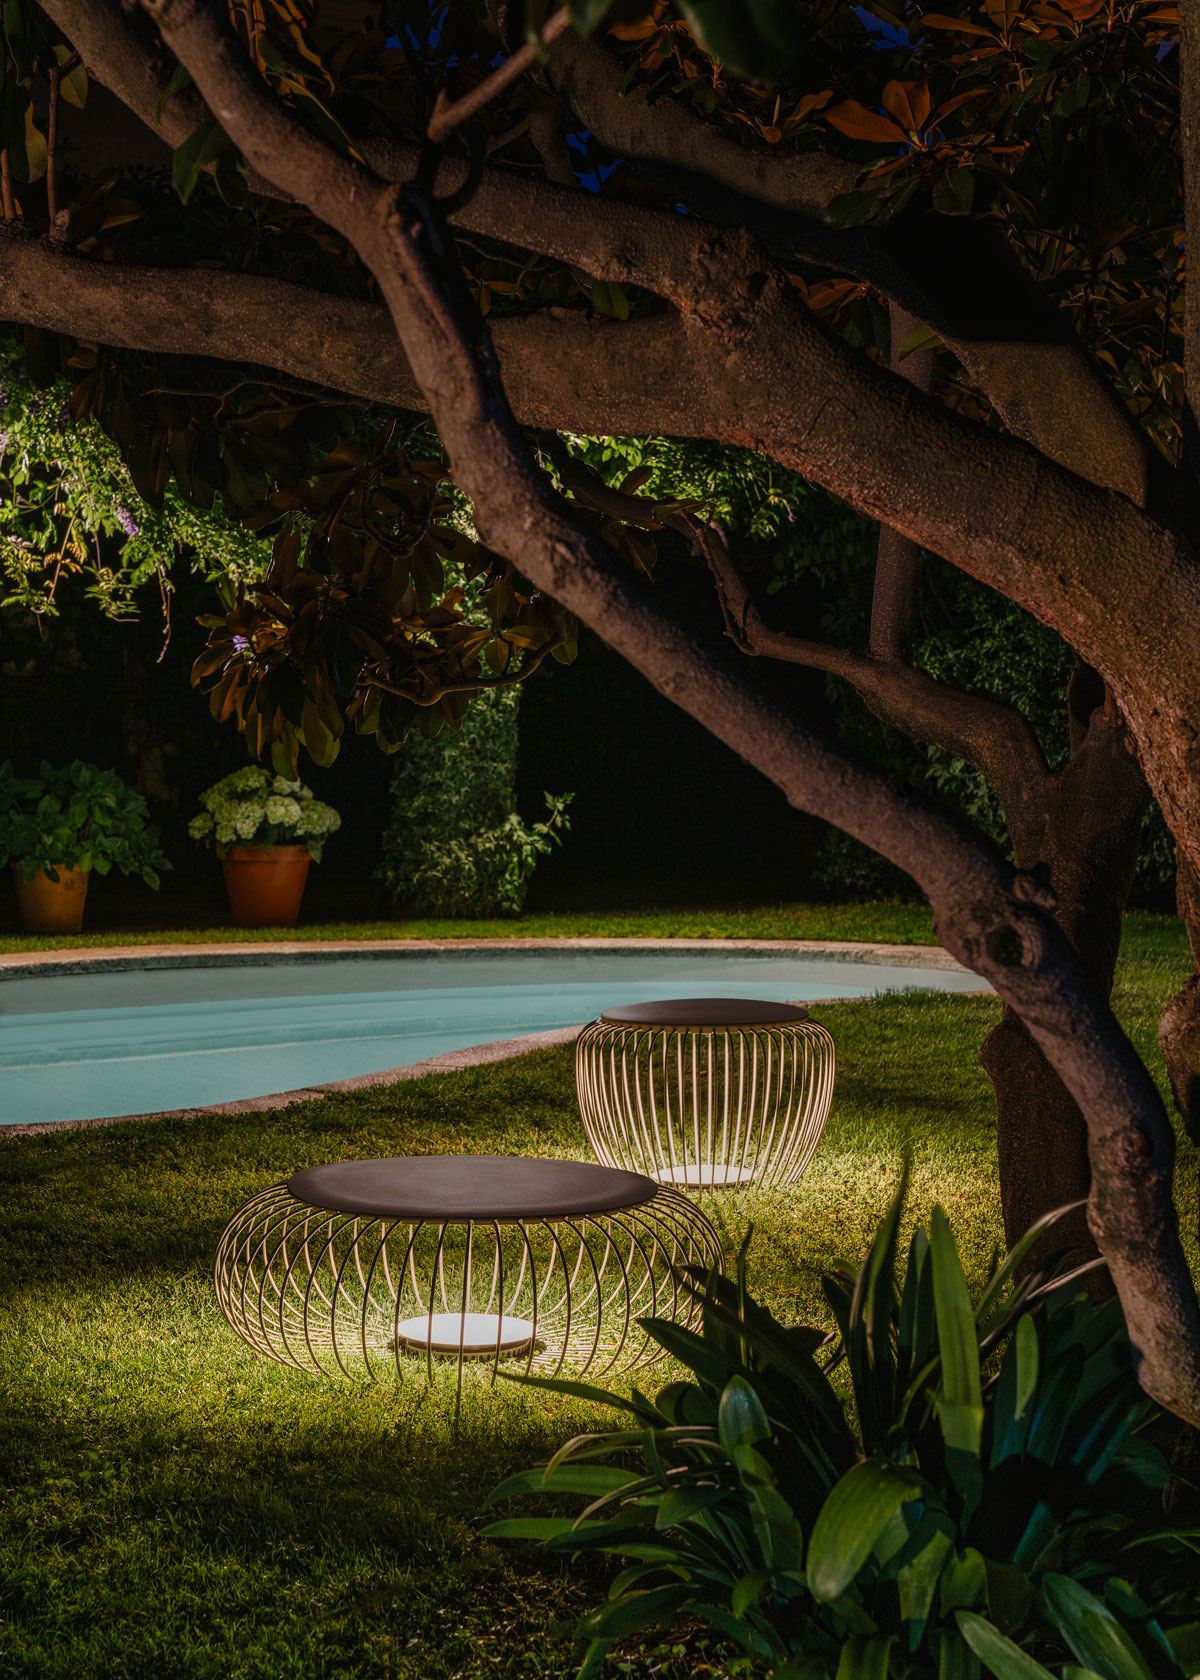 Meridiano: when furniture meets lighting